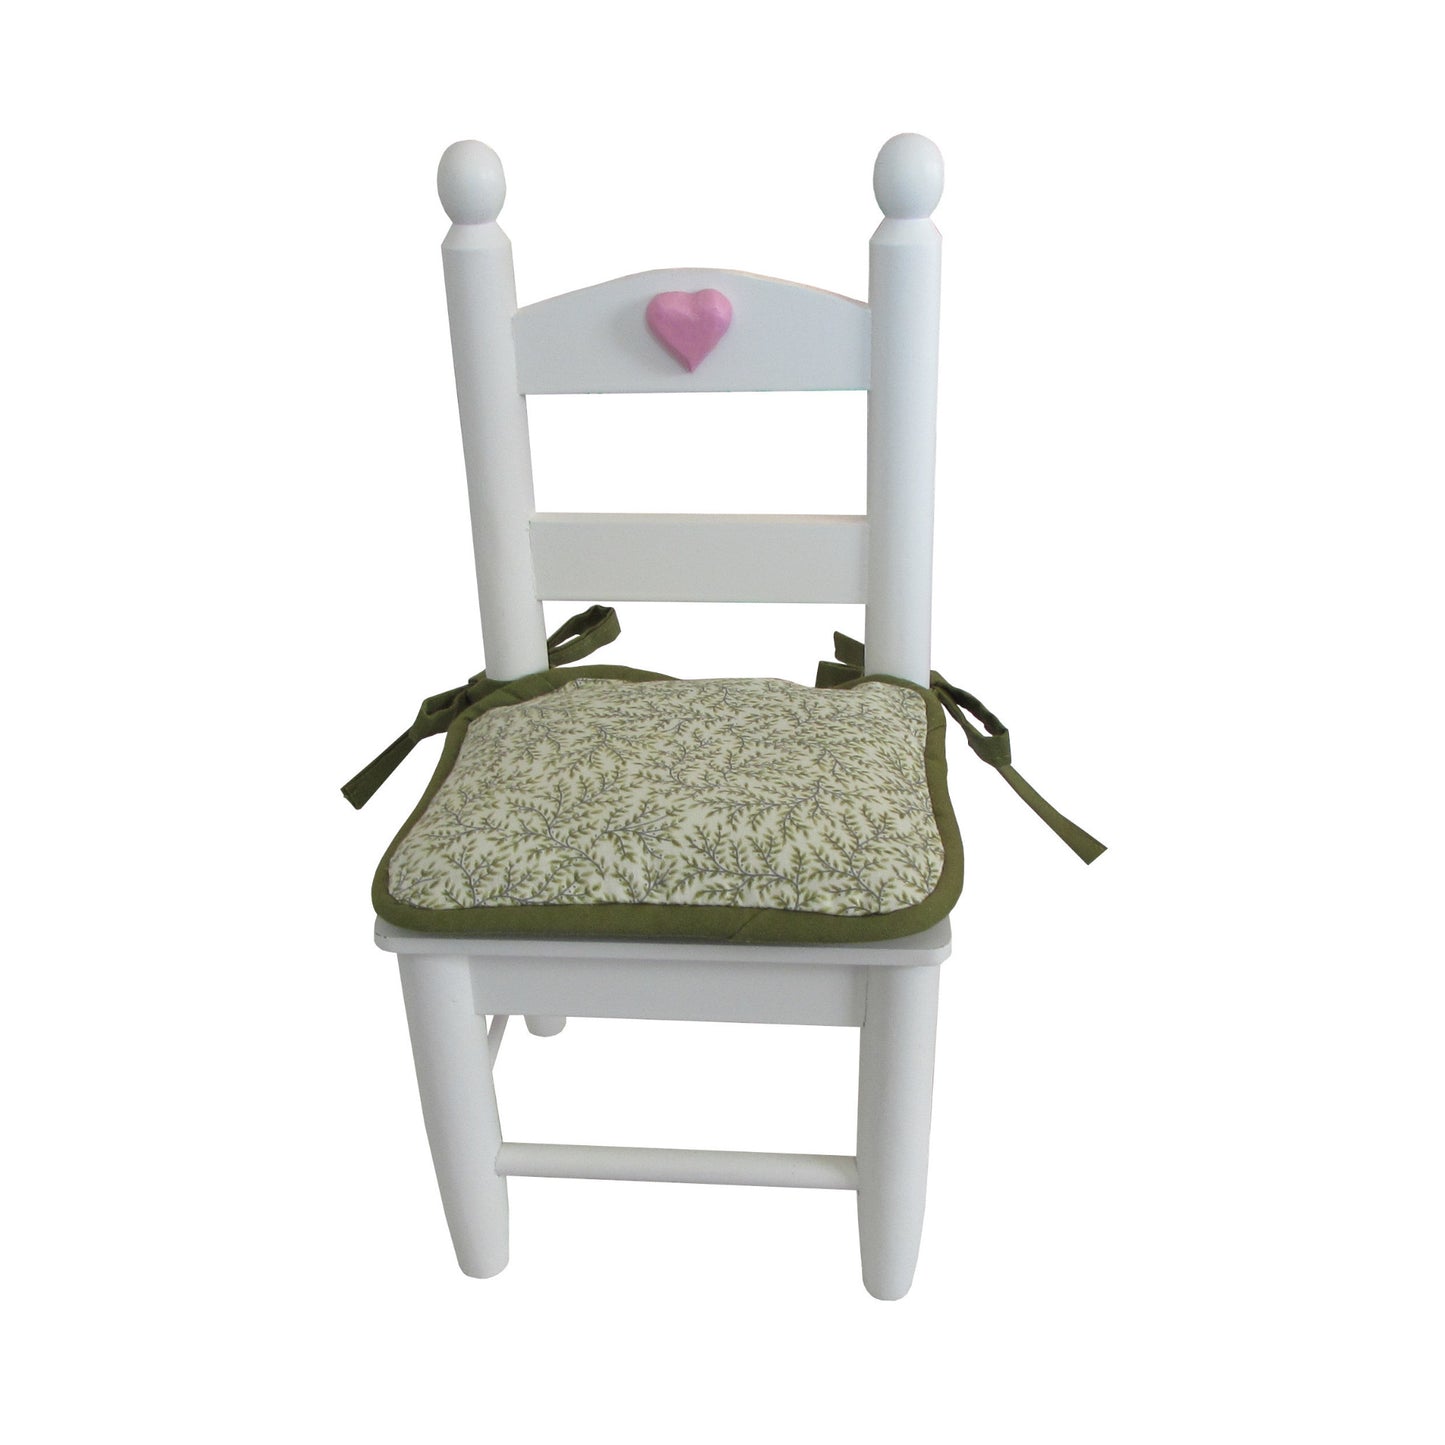 Olive Green Leaves on Cream Print Doll Chair Cushion for 18-inch dolls